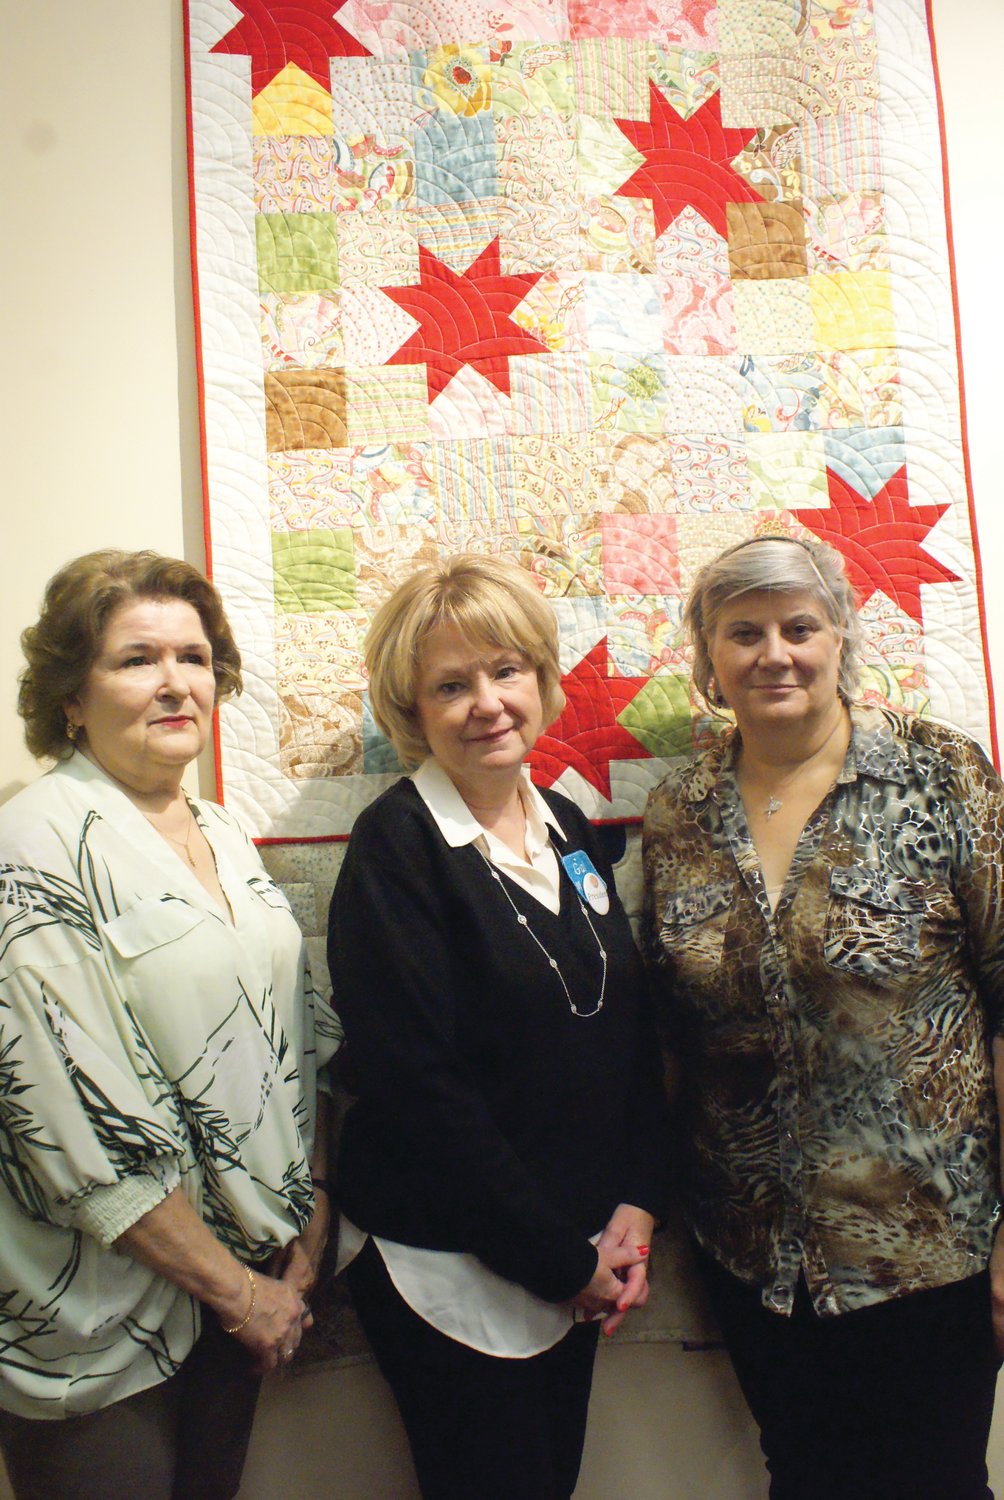 FABRIC CHALLENGE: Members of the Narragansett Bay Quilters’ Association (NBQA) pose with the quilt produced by the event’s co-chairwoman Barbara Hartford (left). In the middle is NBQA’s current president Gail Macera and on the far right is co-chairwoman Geri Bergreen.